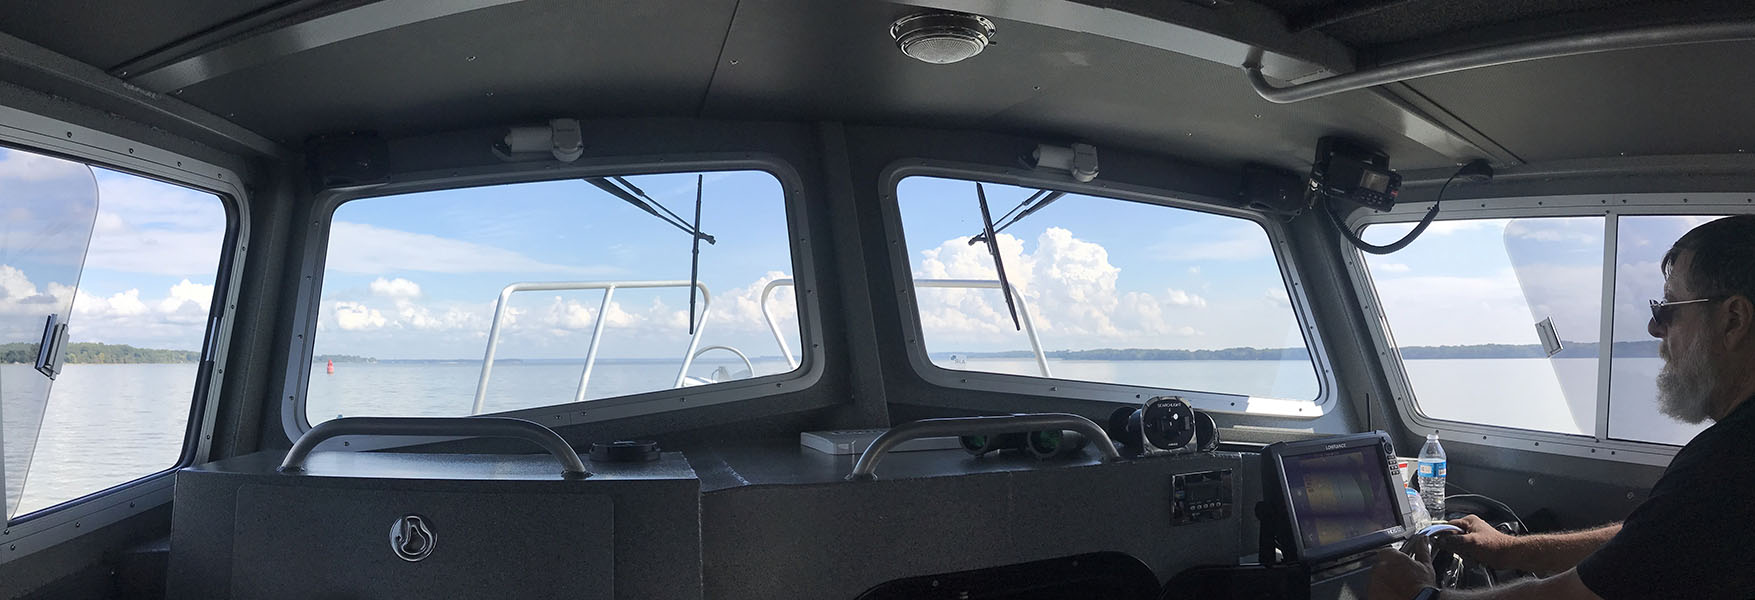 Interior Panorama of the Pilot House of a Professional Aluminum Fishing Boat.